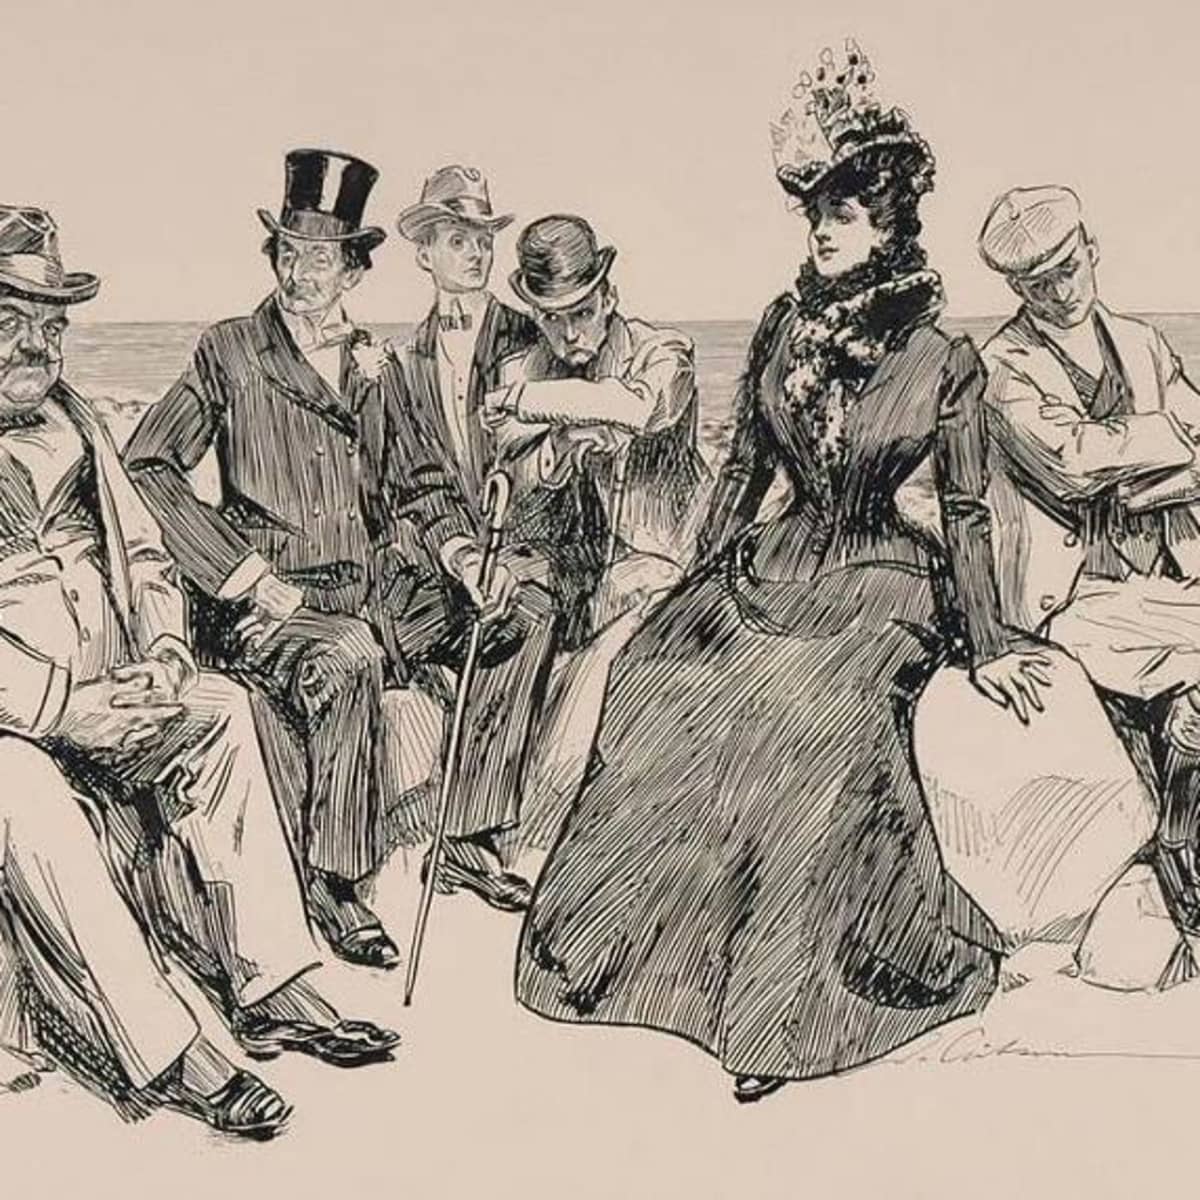 14 Great Books About Victorian Fashion